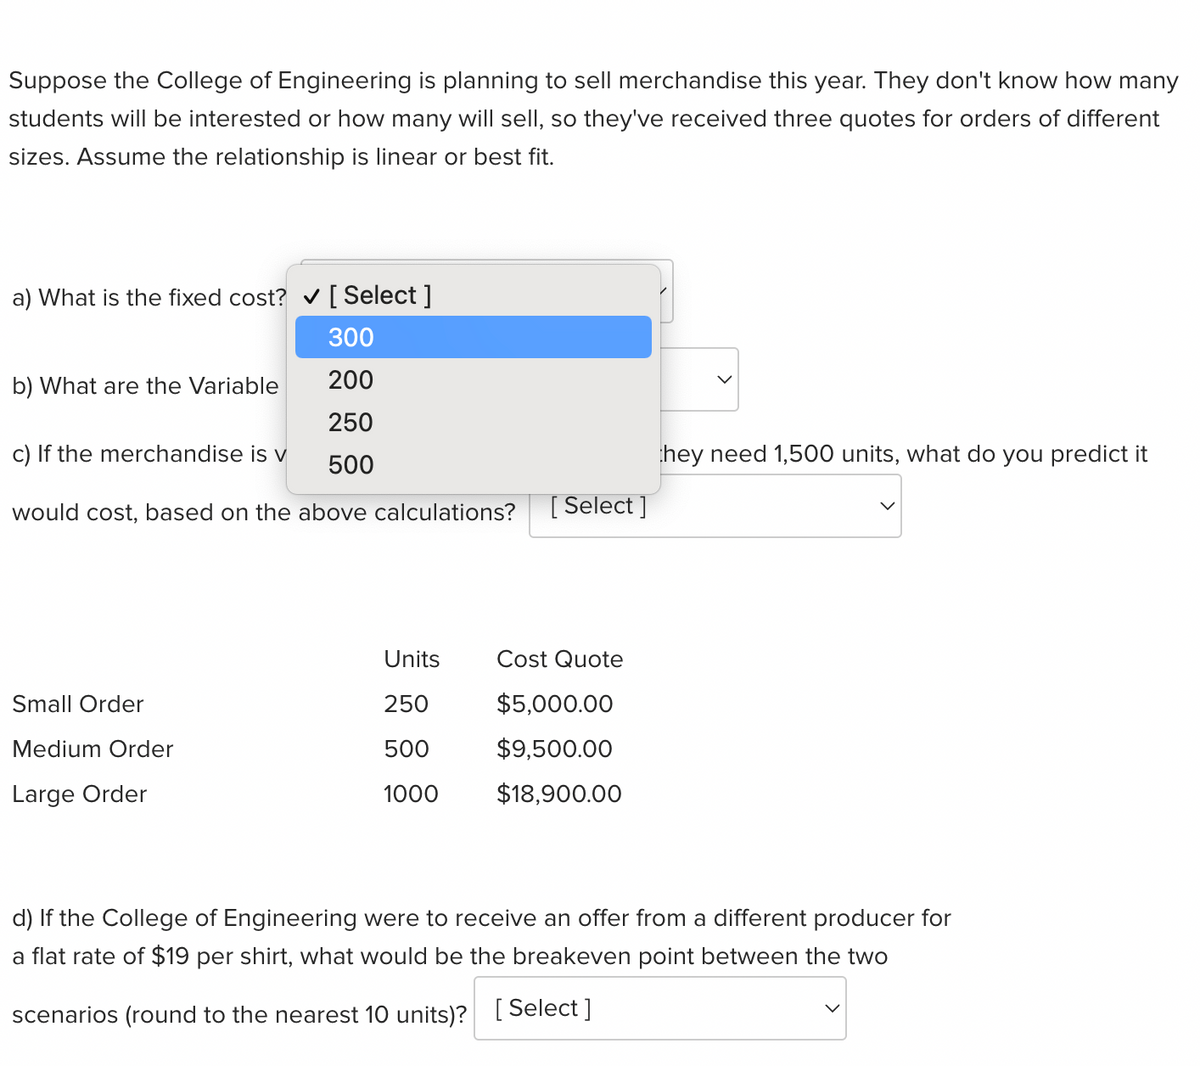 Suppose the College of Engineering is planning to sell merchandise this year. They don't know how many
students will be interested or how many will sell, so they've received three quotes for orders of different
sizes. Assume the relationship is linear or best fit.
a) What is the fixed cost? ✔ [ Select]
300
200
250
500
would cost, based on the above calculations?
b) What are the Variable
c) If the merchandise is v
Small Order
Medium Order
Large Order
Units
250
500
1000
[Select]
Cost Quote
$5,000.00
$9,500.00
$18,900.00
they need 1,500 units, what do you predict it
d) If the College of Engineering were to receive an offer from a different producer for
a flat rate of $19 per shirt, what would be the breakeven point between the two
scenarios (round to the nearest 10 units)? [Select]